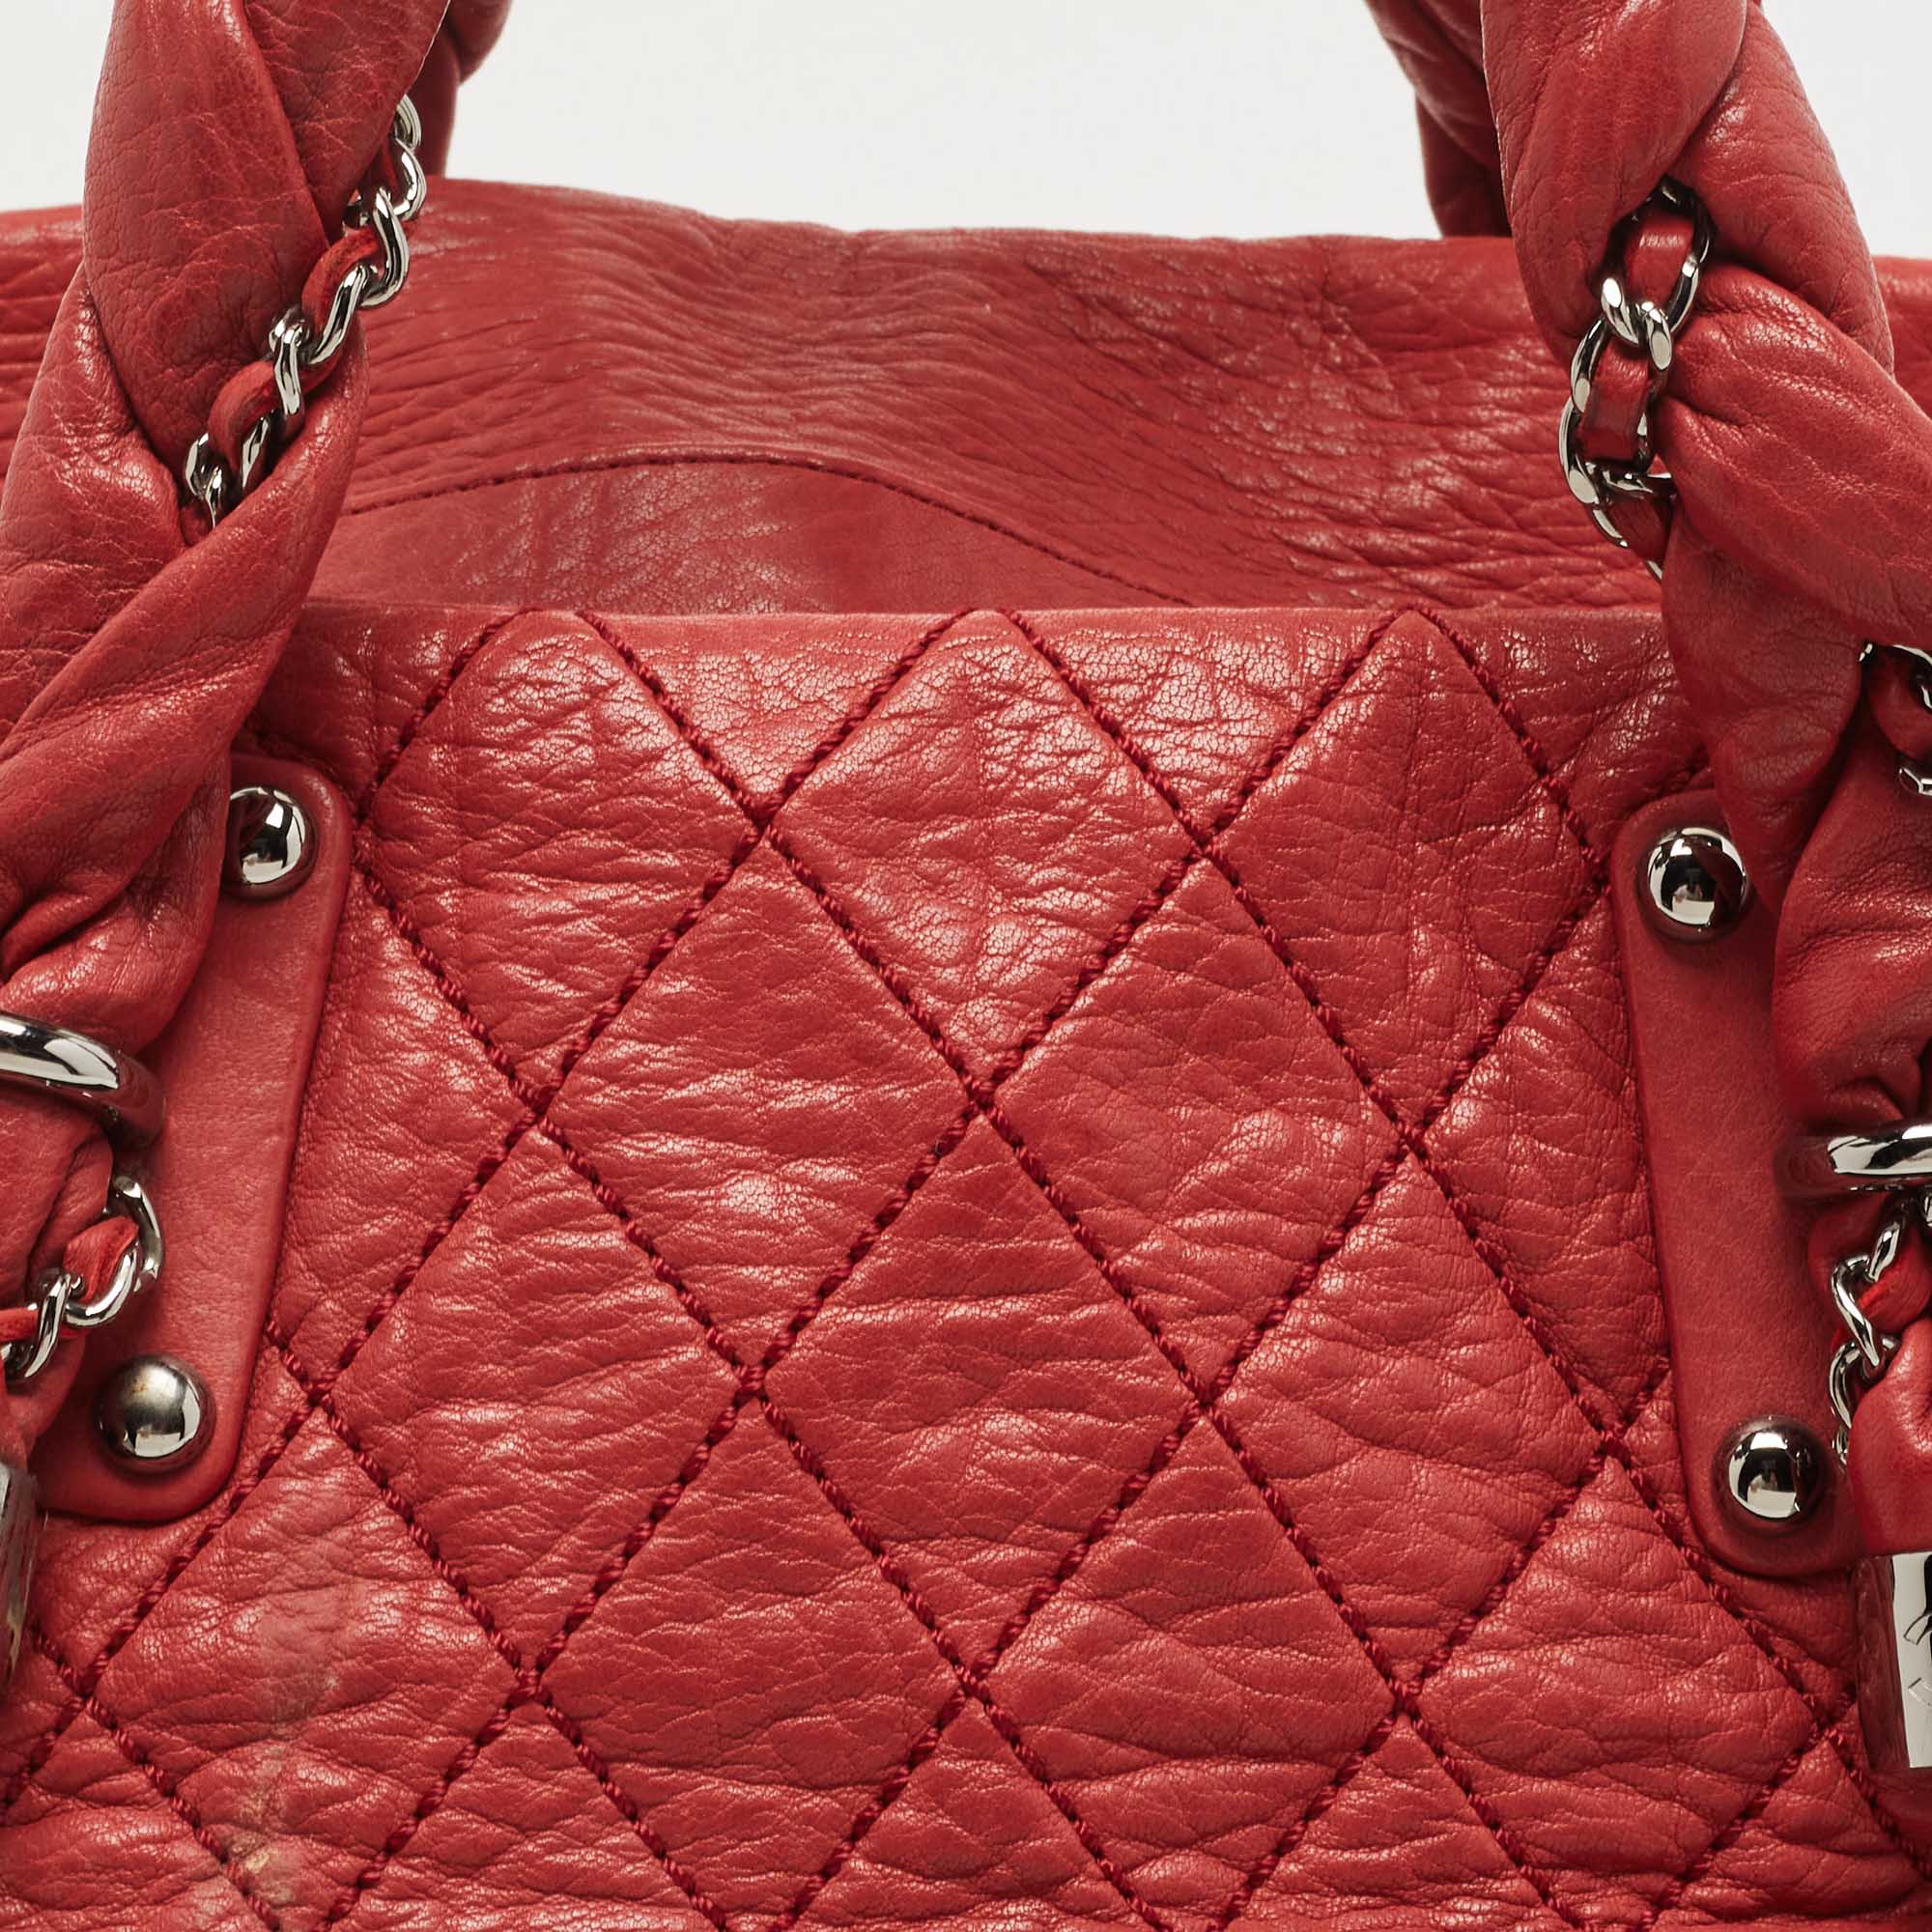 Chanel Red Quilted Leather Lady Braid Bowler Bag